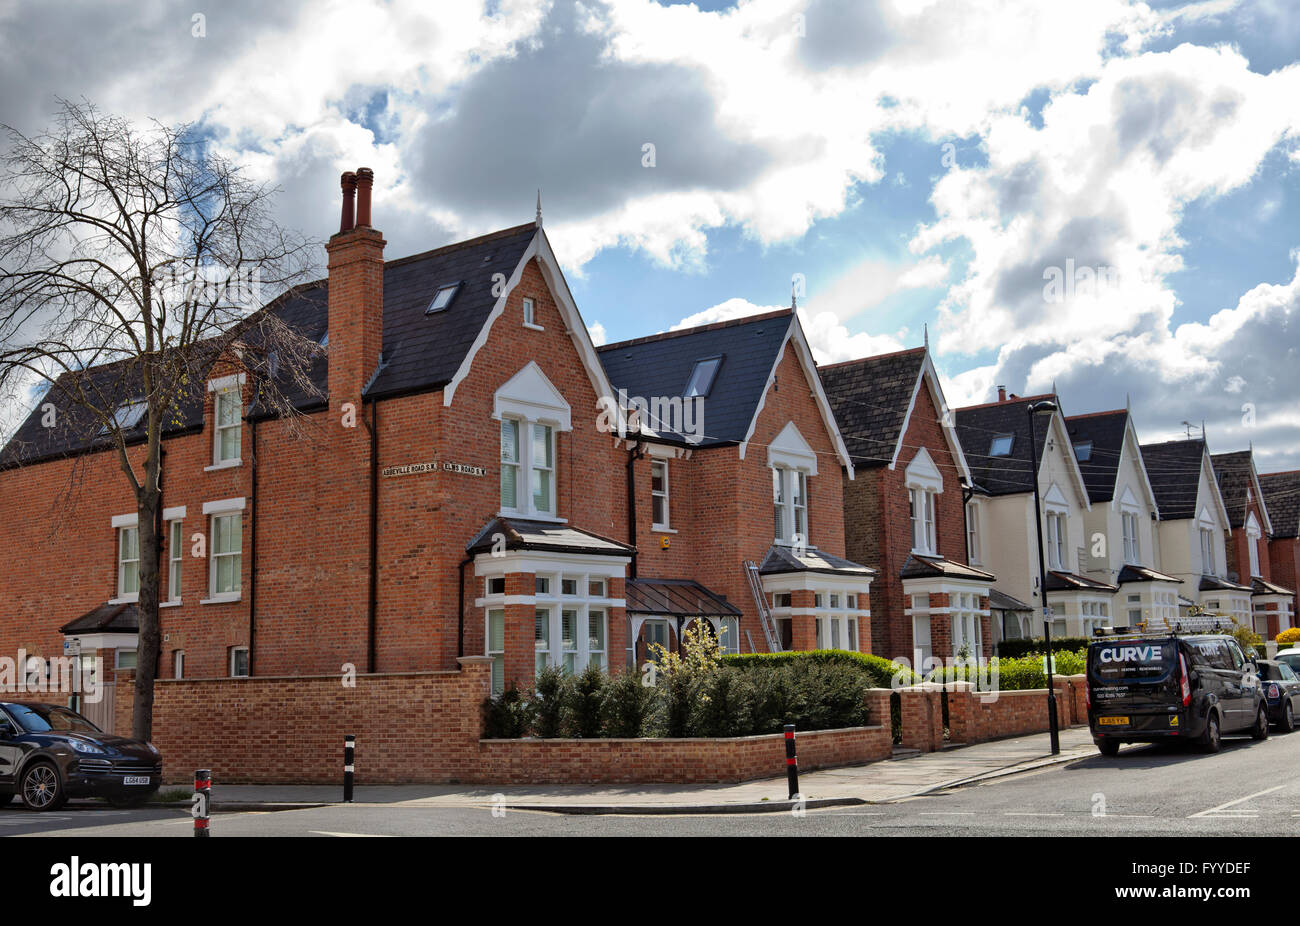 Houses on corner of Abbeville and Elms Rd in Clapham in London UK Stock Photo